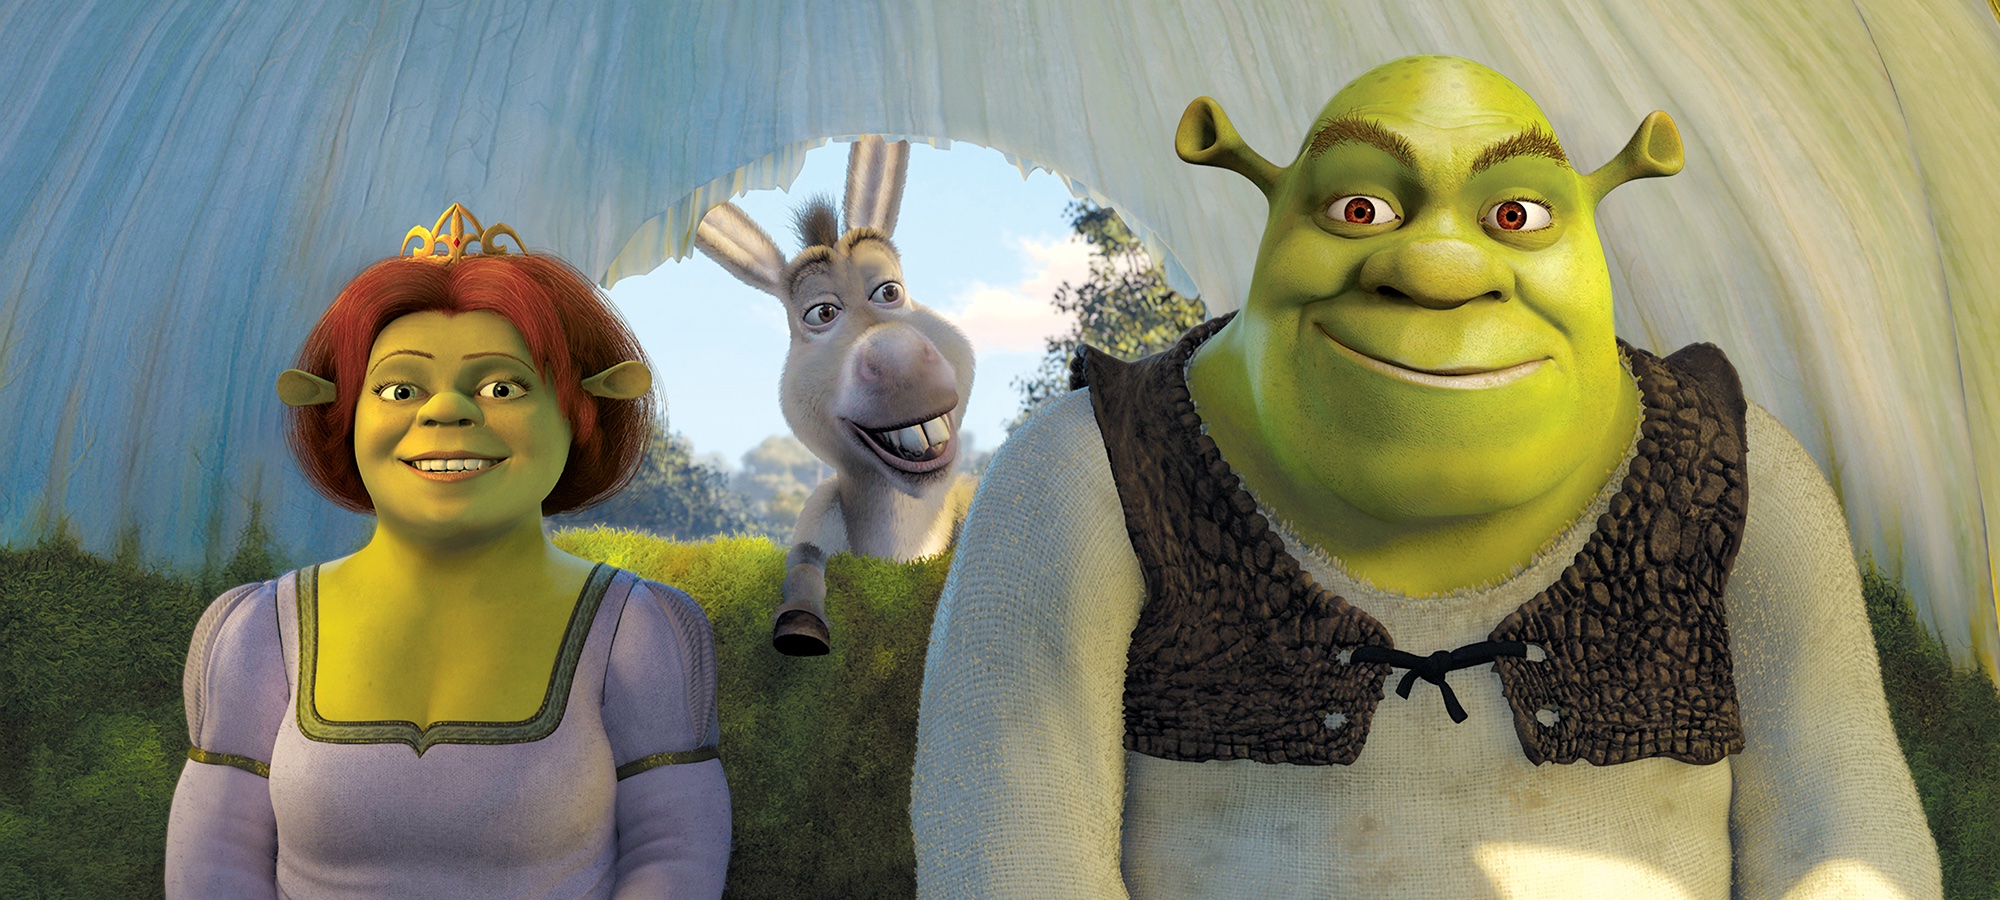 Exciting News: Shrek 5 Movie Release Hinted for 2025 by NBCUniversal Leak